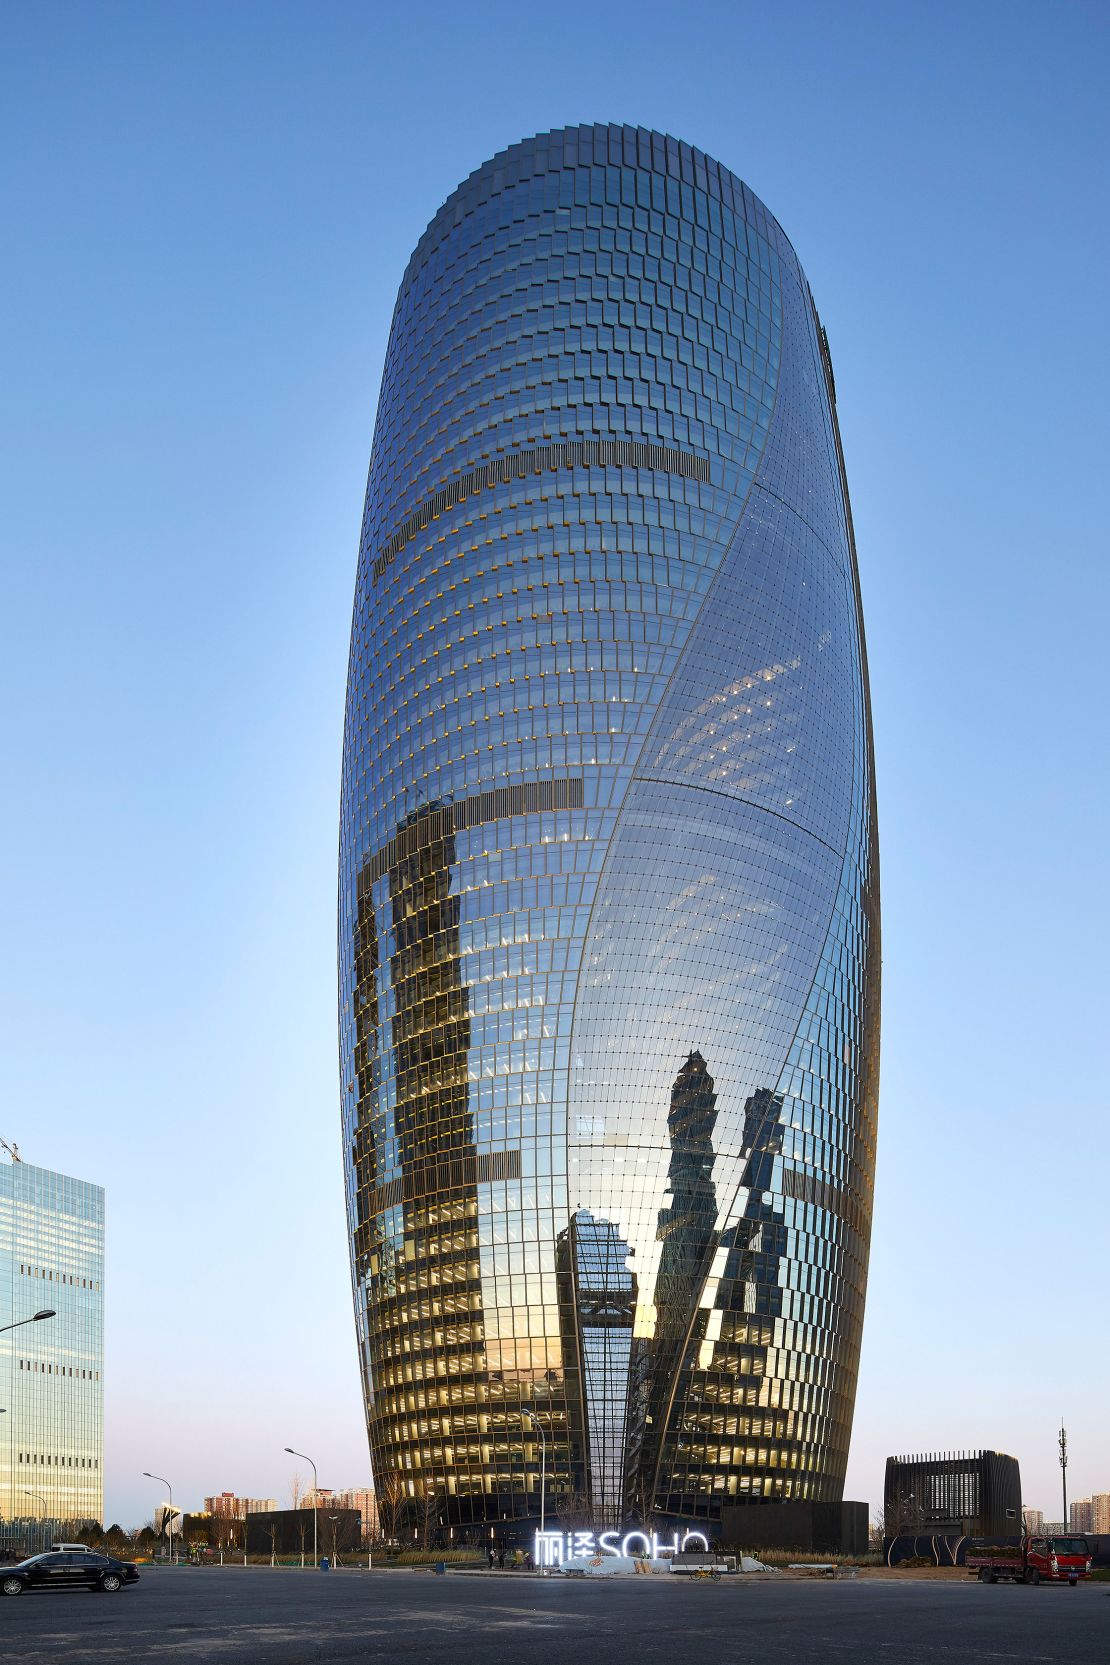 The tower is designed to be a focal point of the new Fengtai business district.